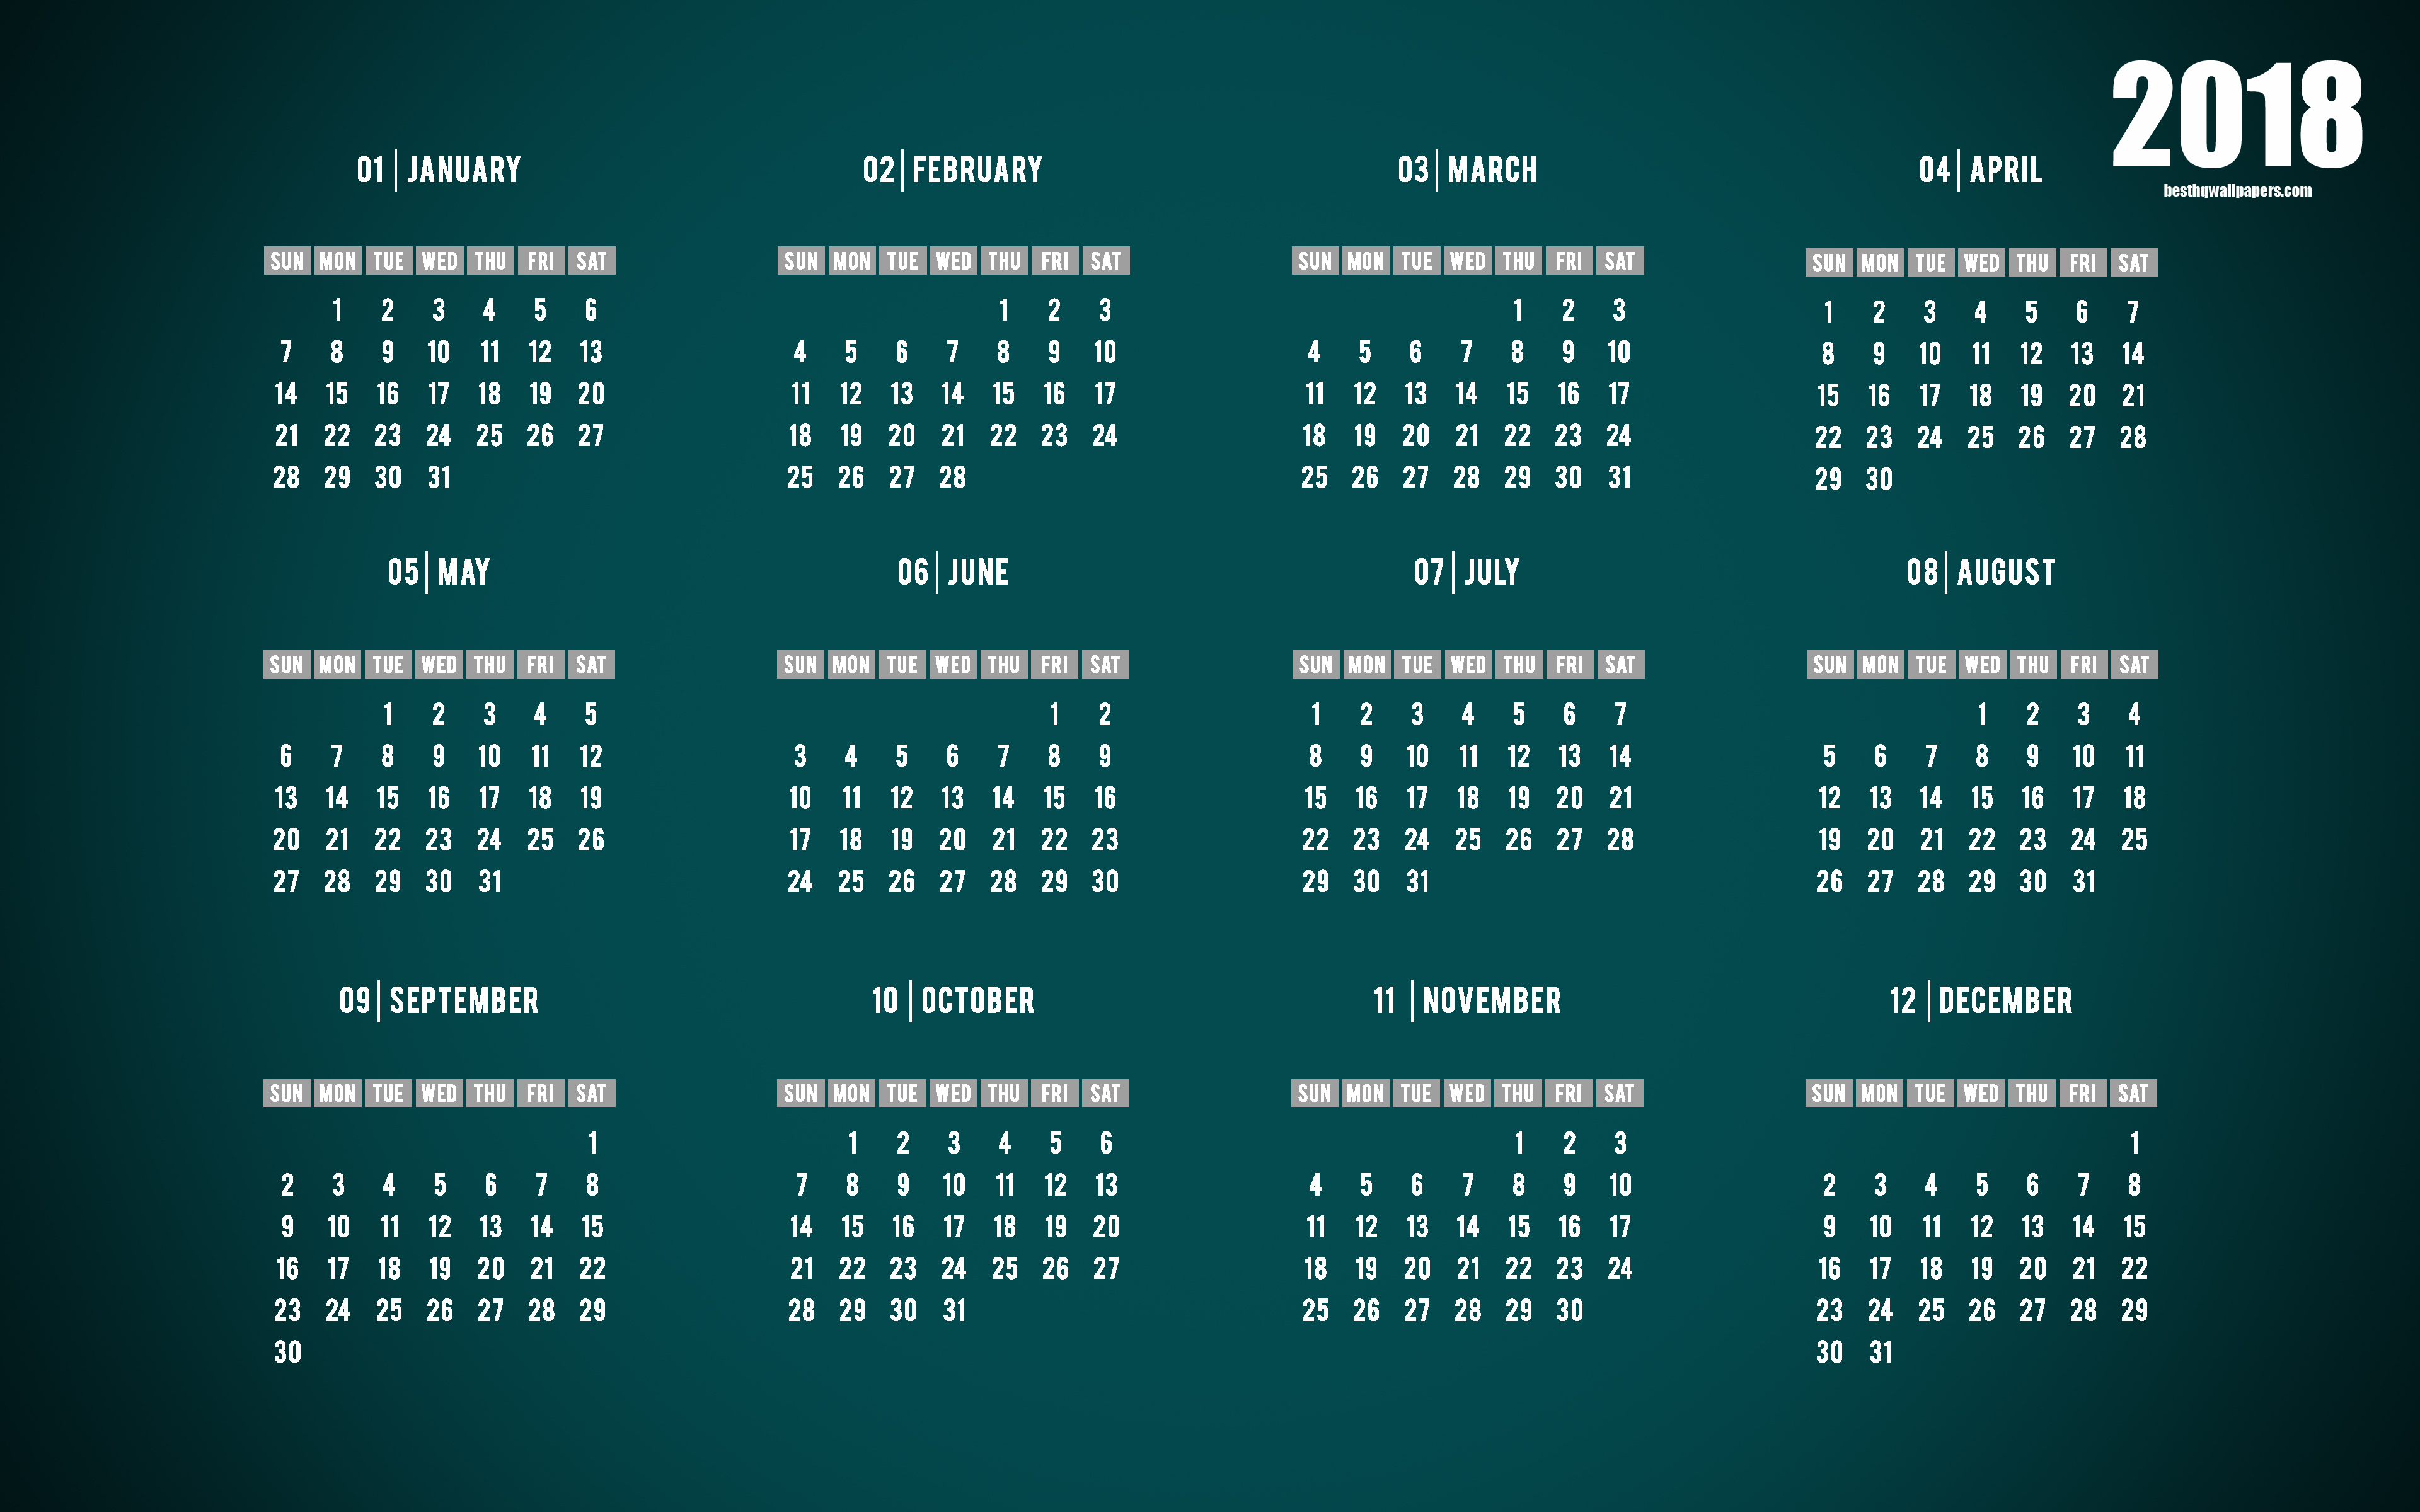 Download wallpapers The calendar for 2018 green background 2018 year